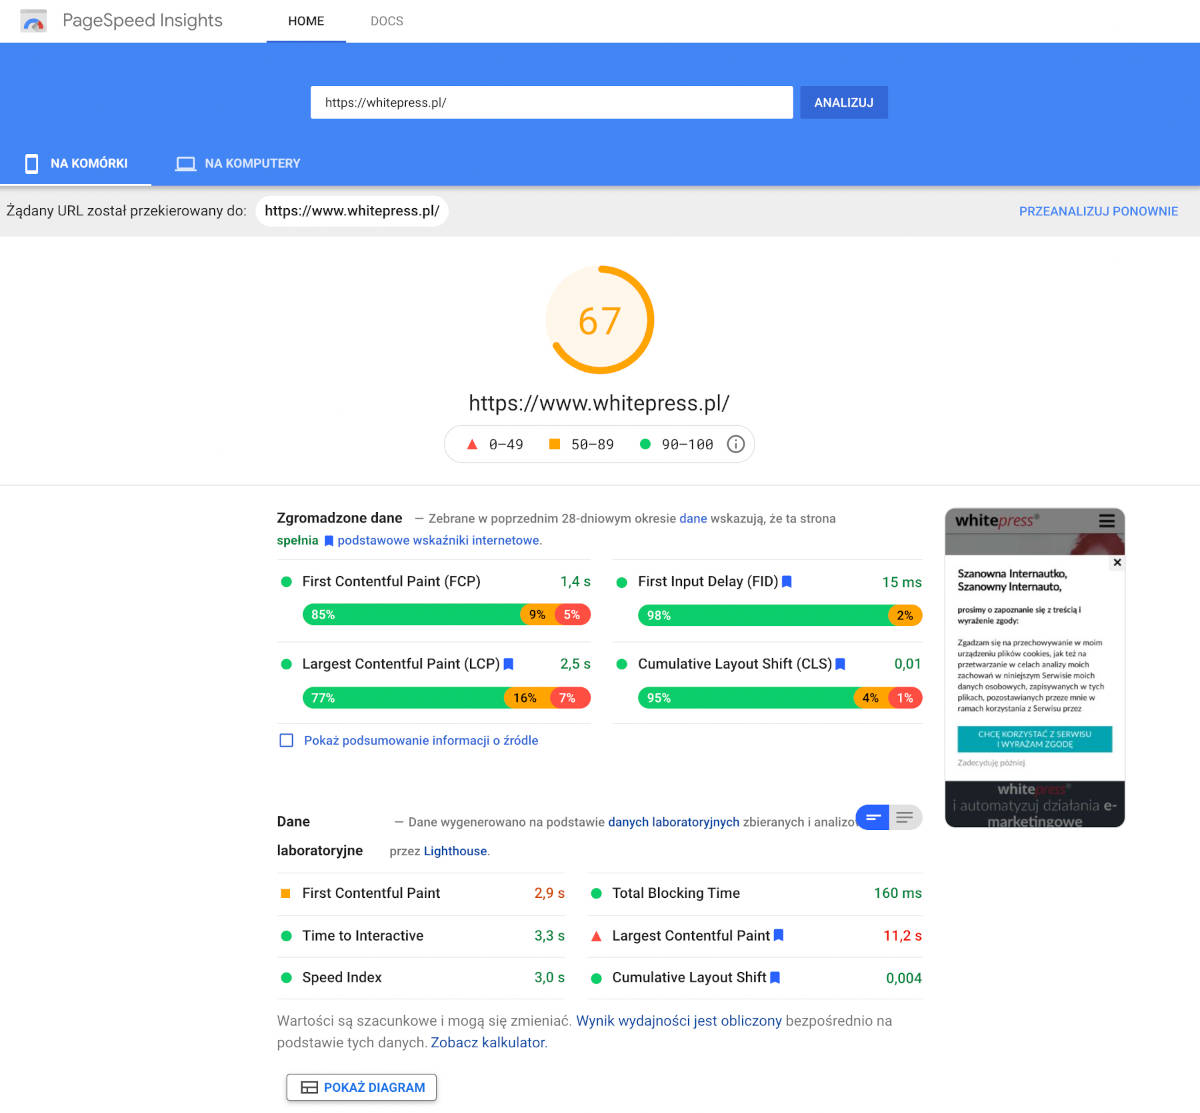 PageSpeed Insights audyt strony whitepress.pl